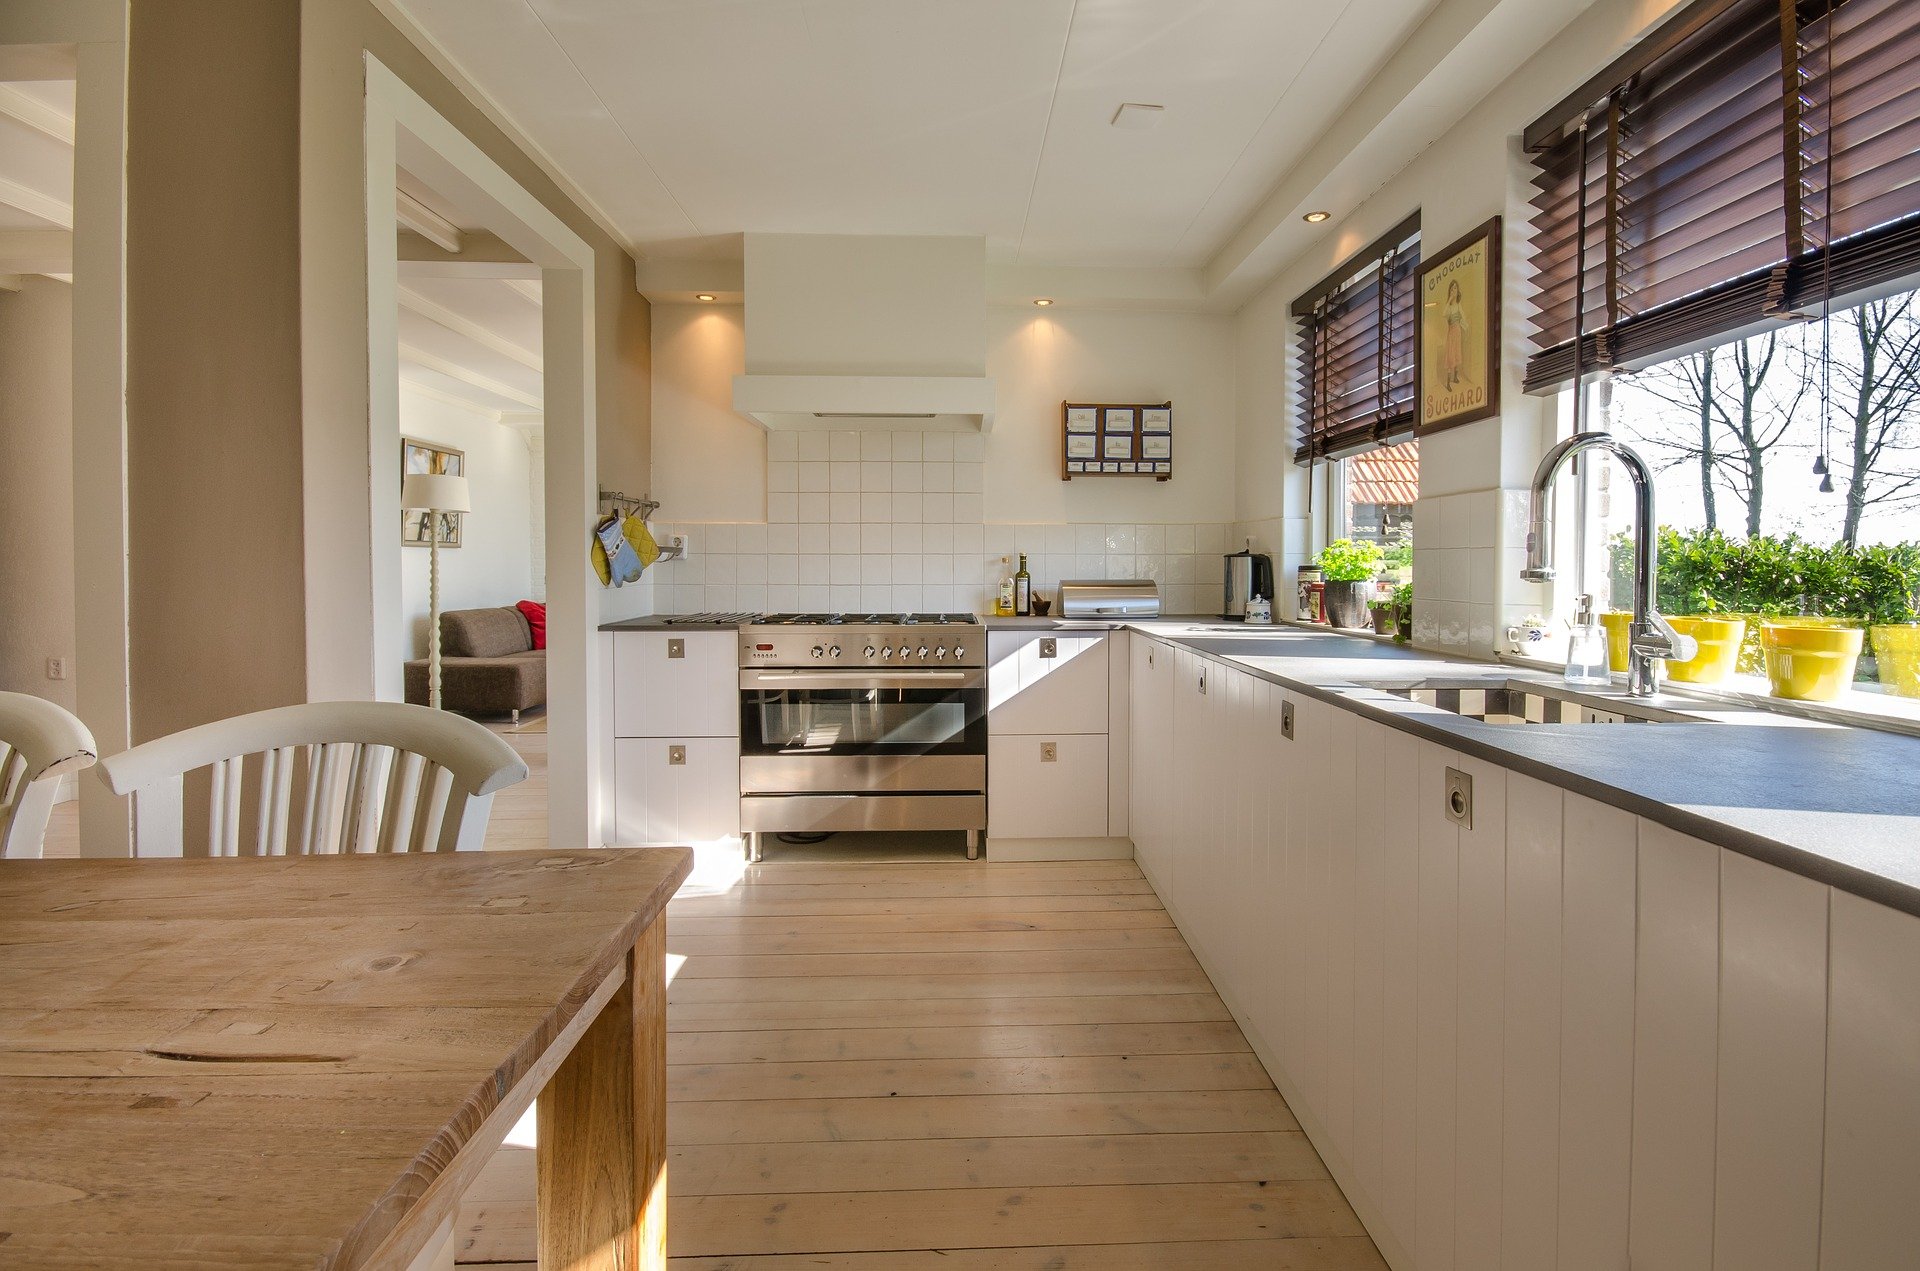 kitchen with wooden floors